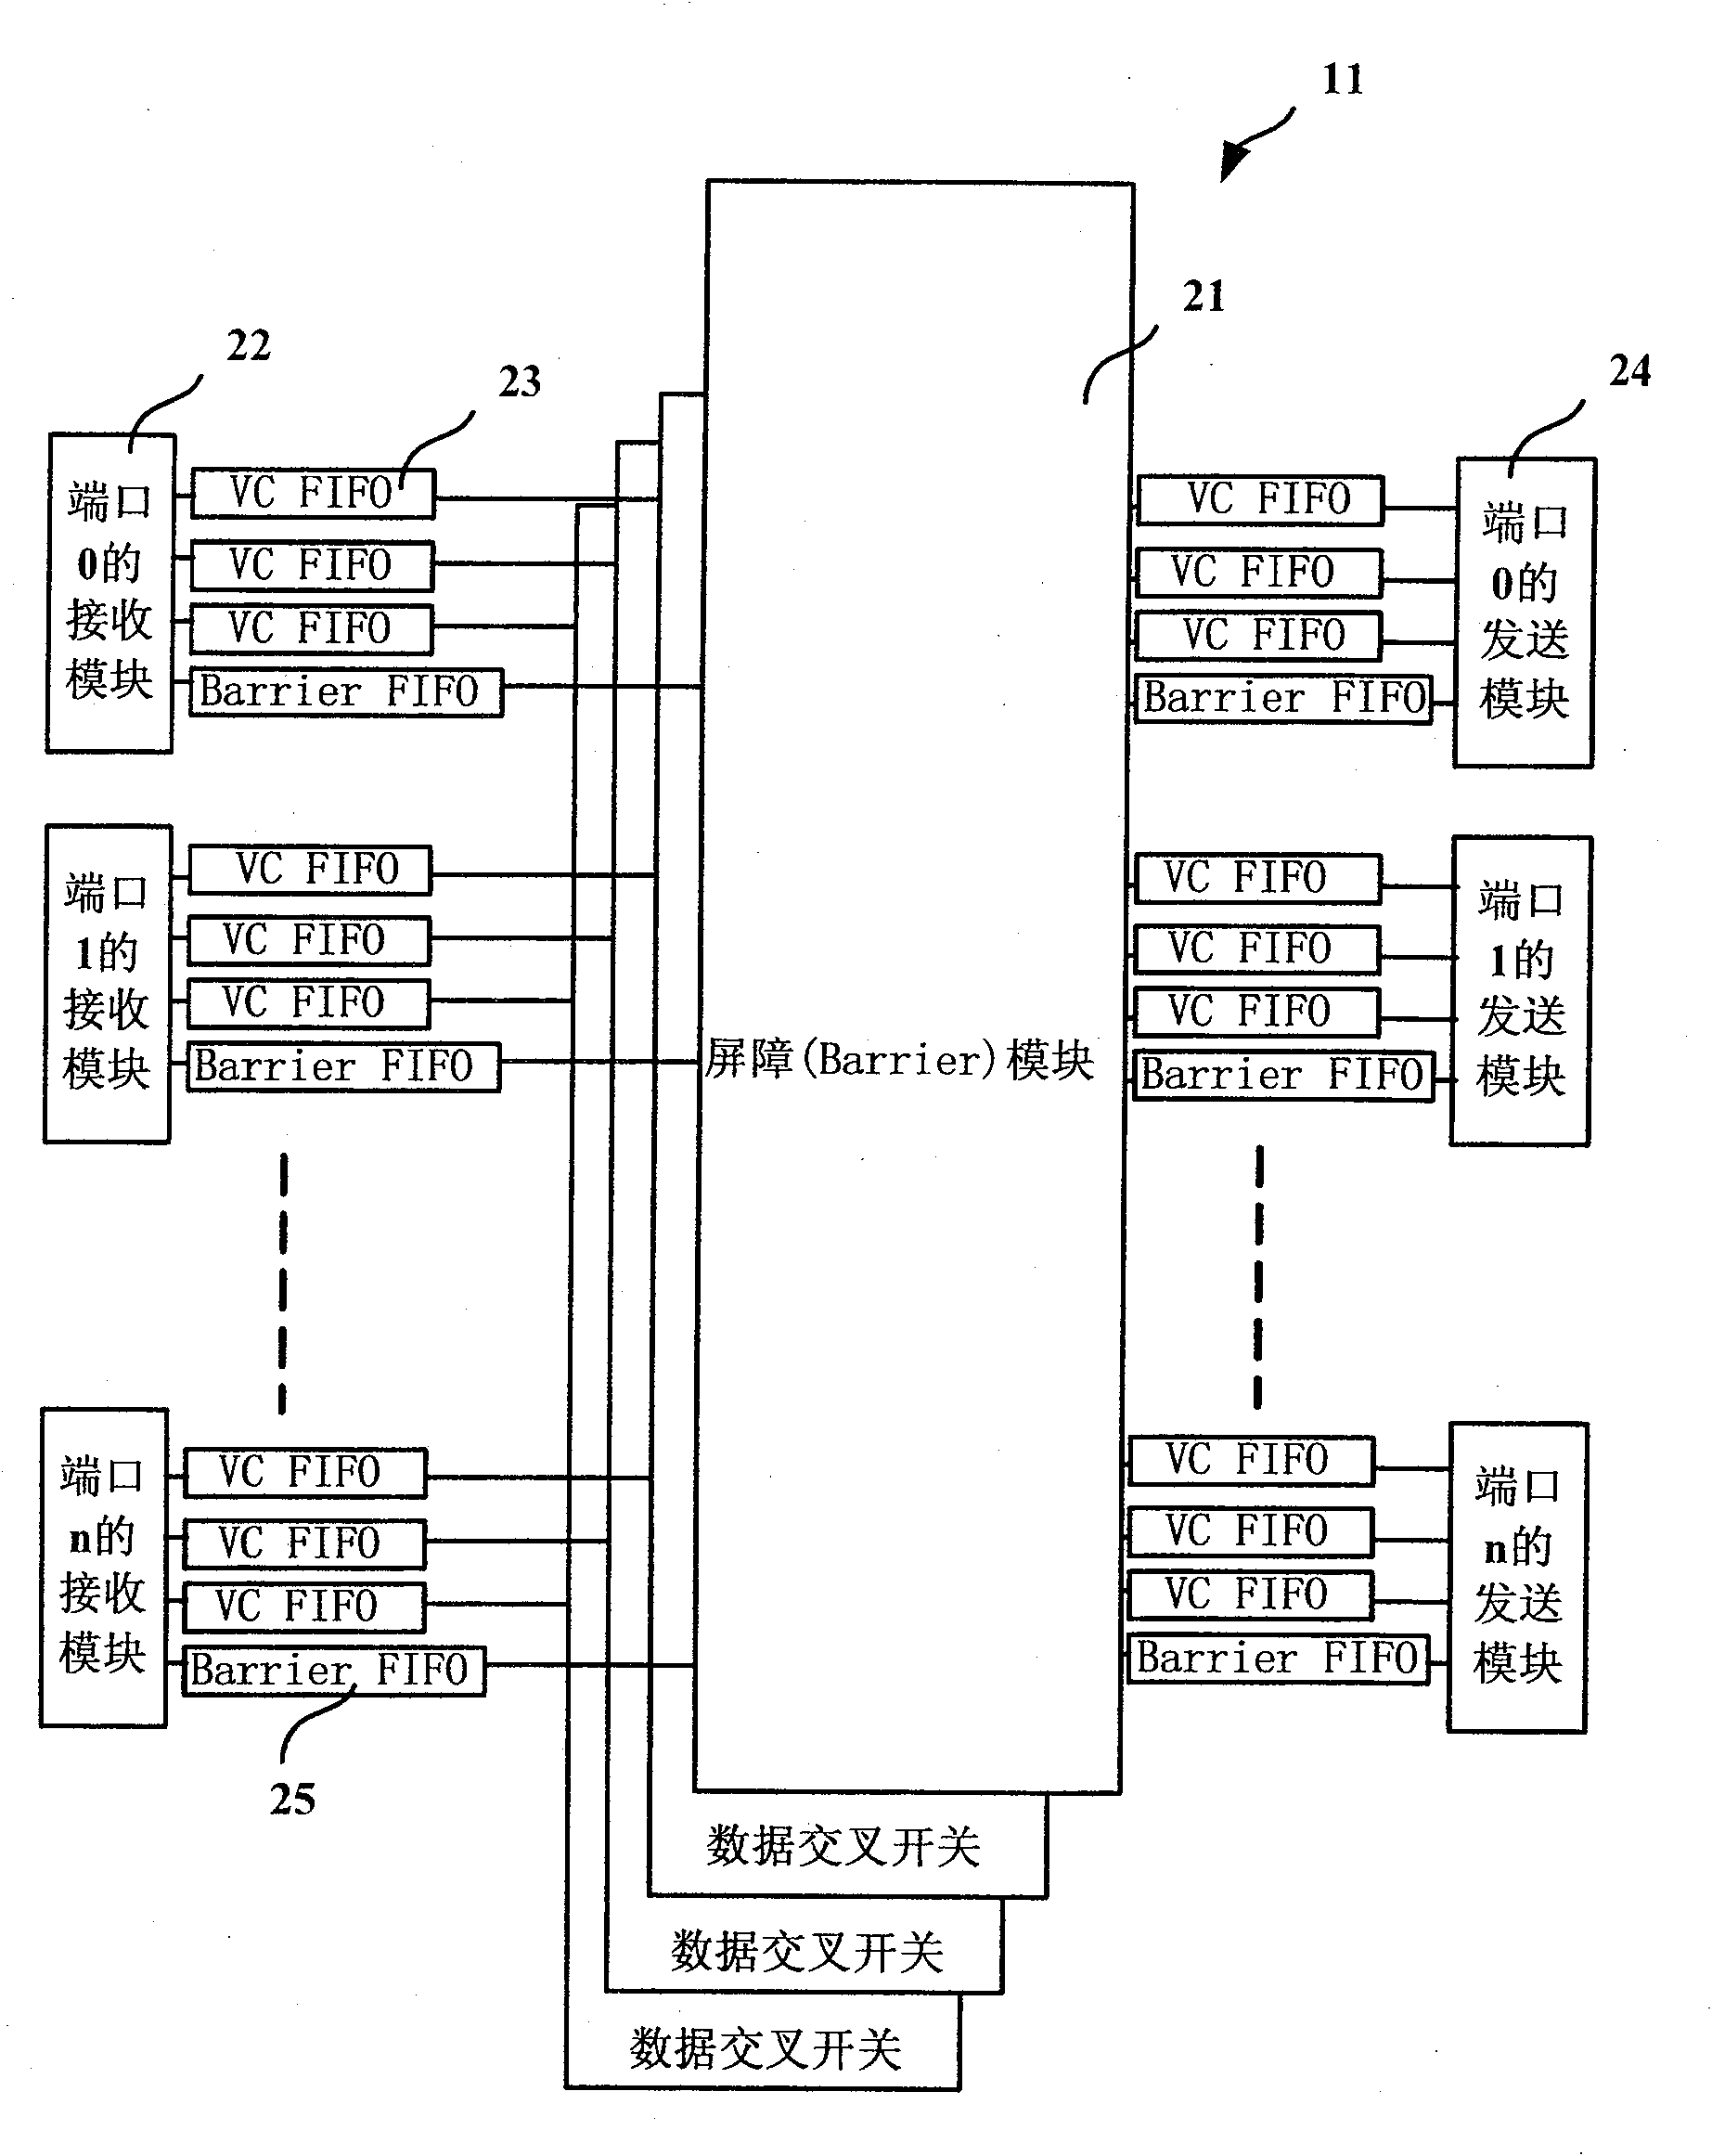 A barrier operating network system, device and method based on fat tree topology